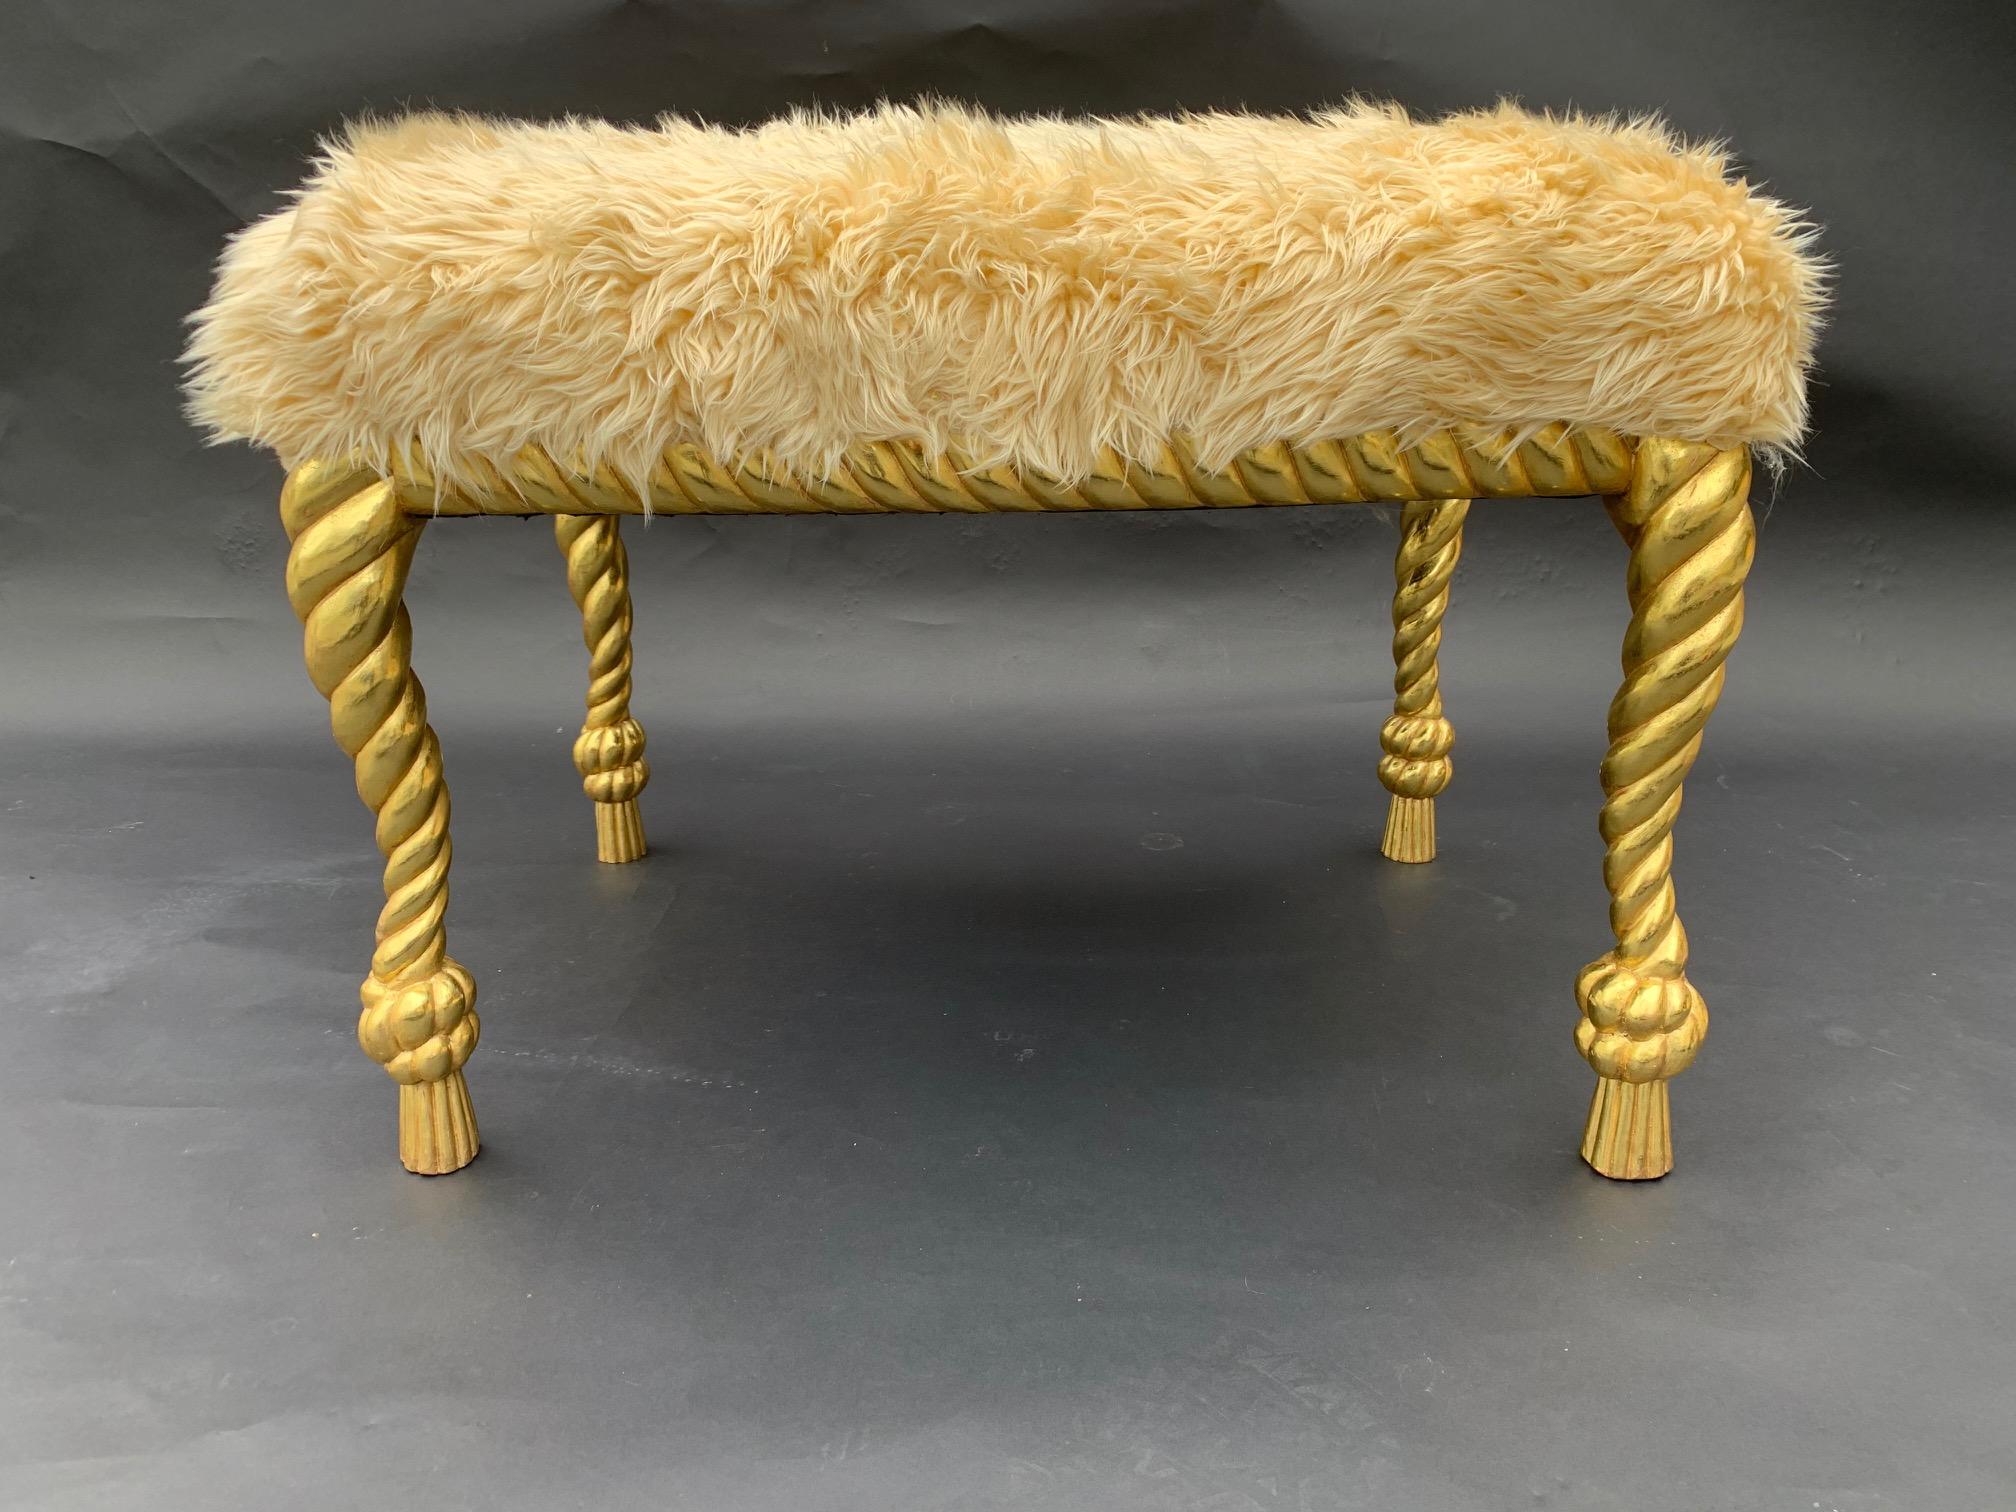 Hand carved wood and gilt pair of stools, 22-karat gold leaf, newly upholstery, 1950s, Italy.